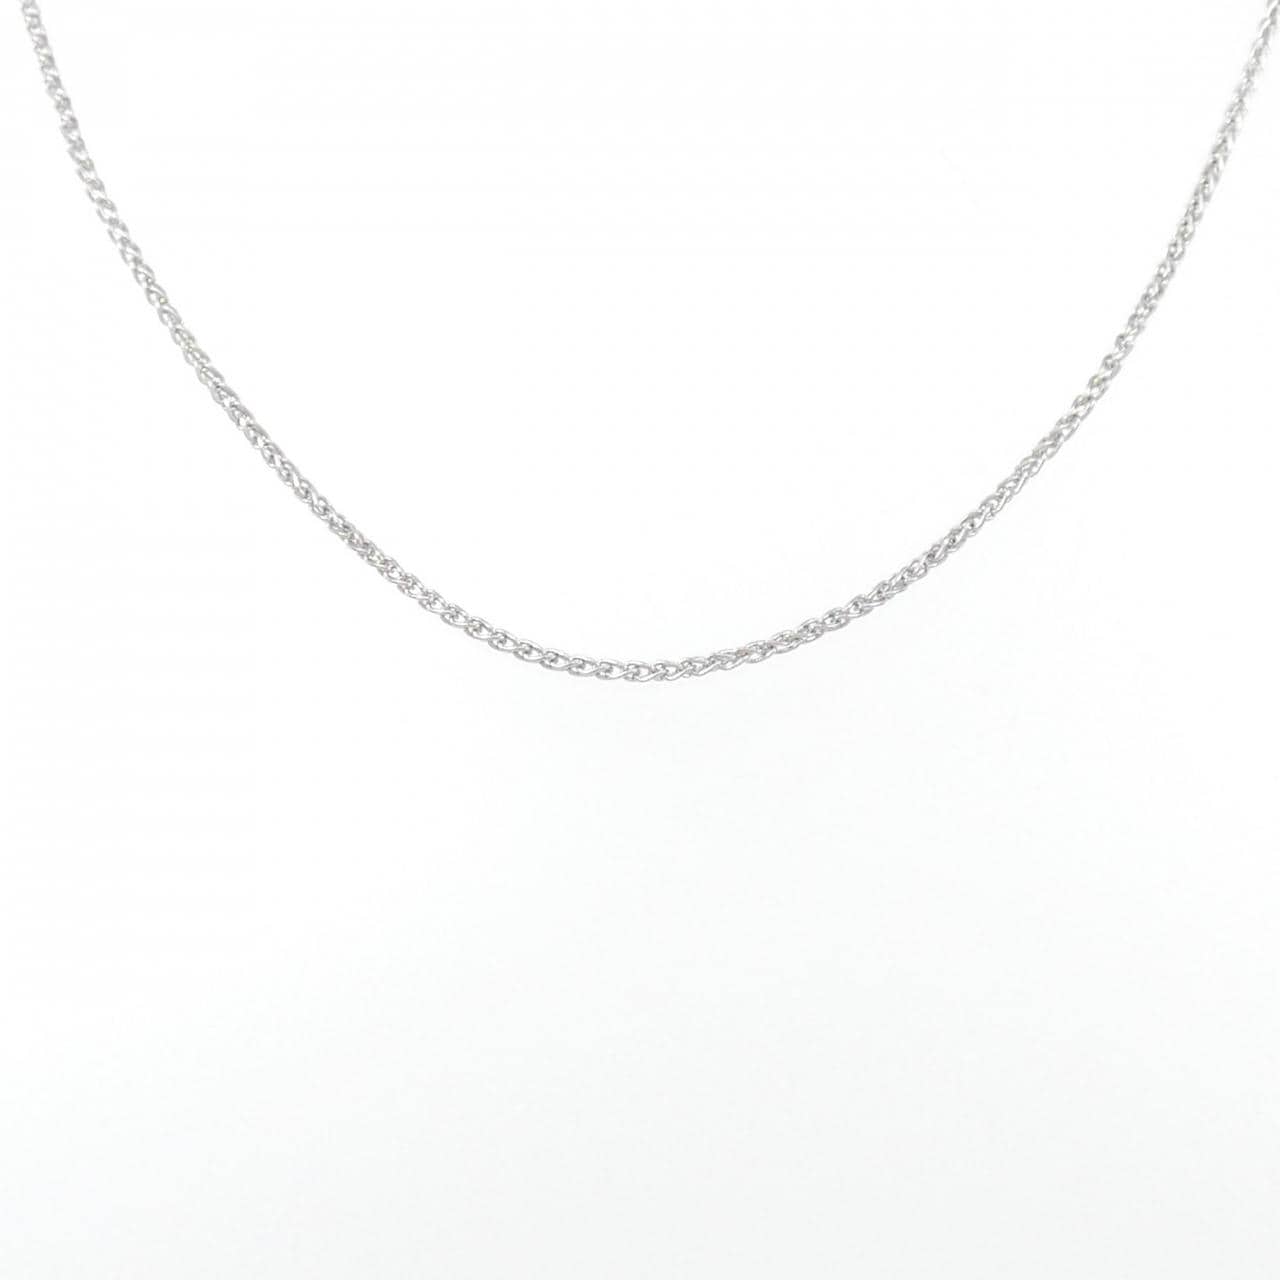 585WG Chain Necklace